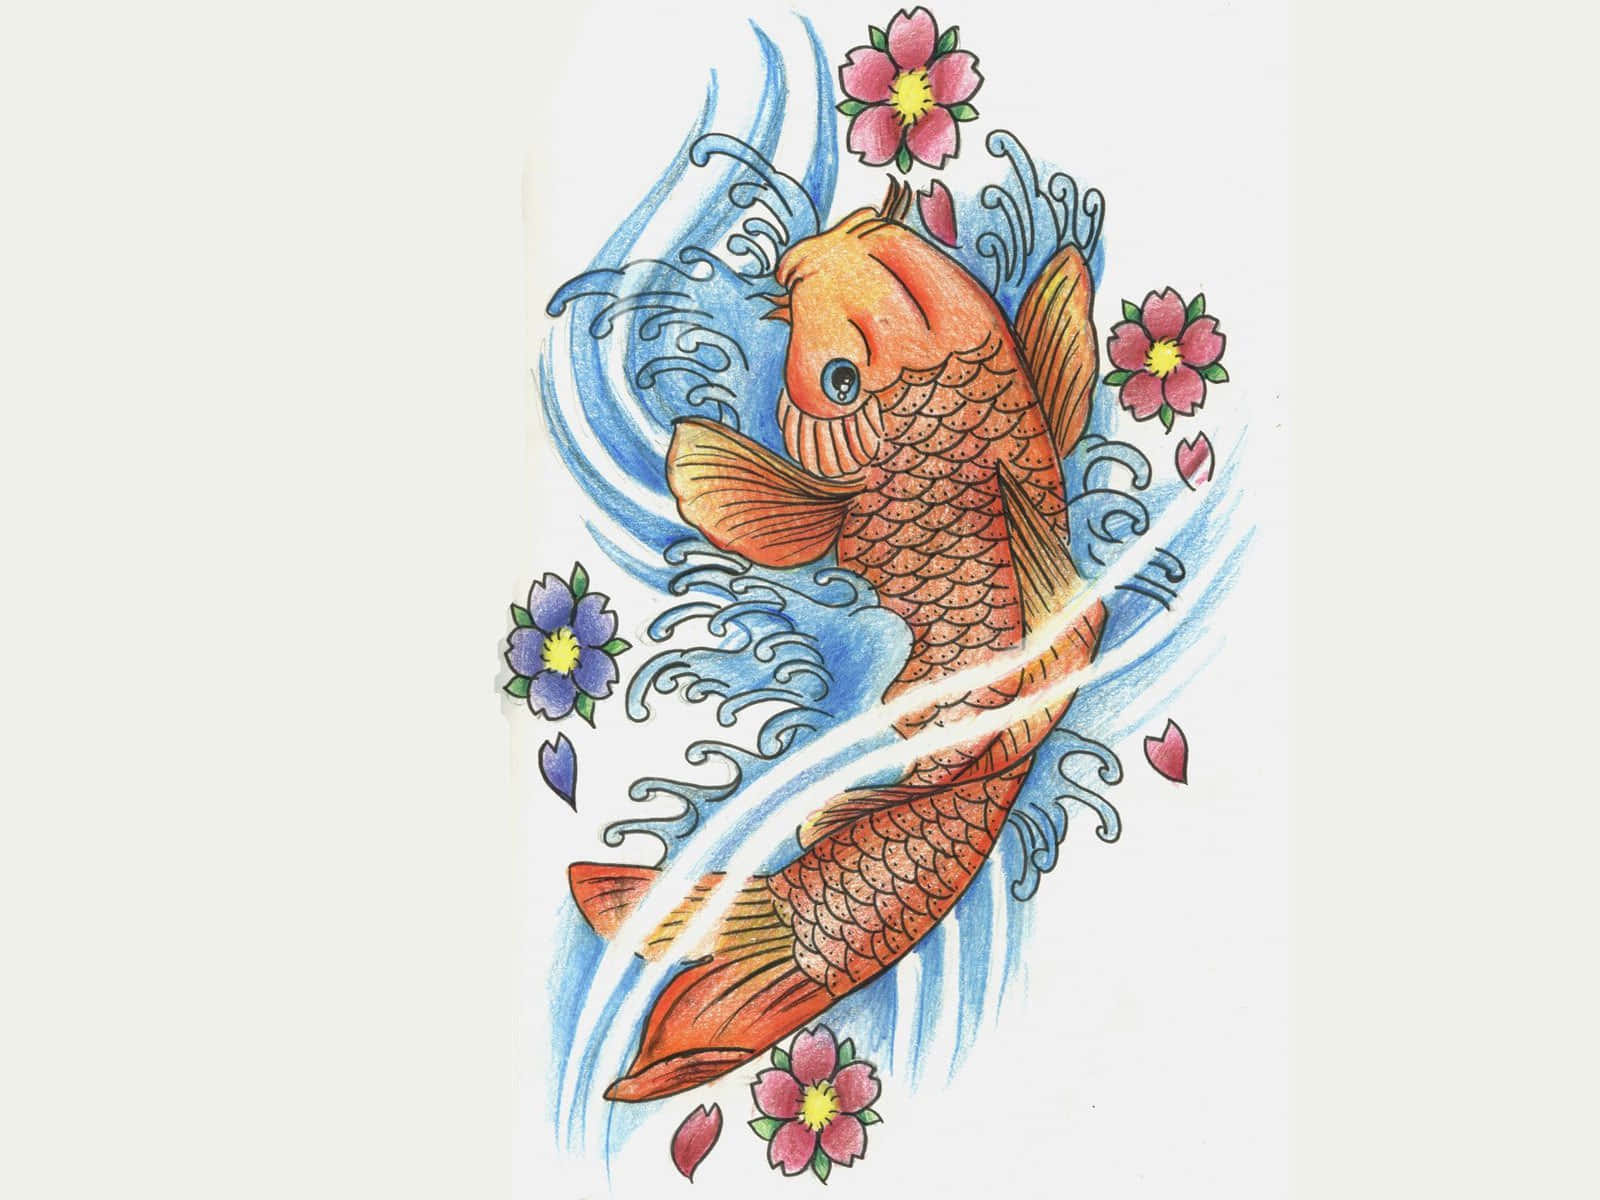 Download A Koi Fish Tattoo Design With Flowers And Waves